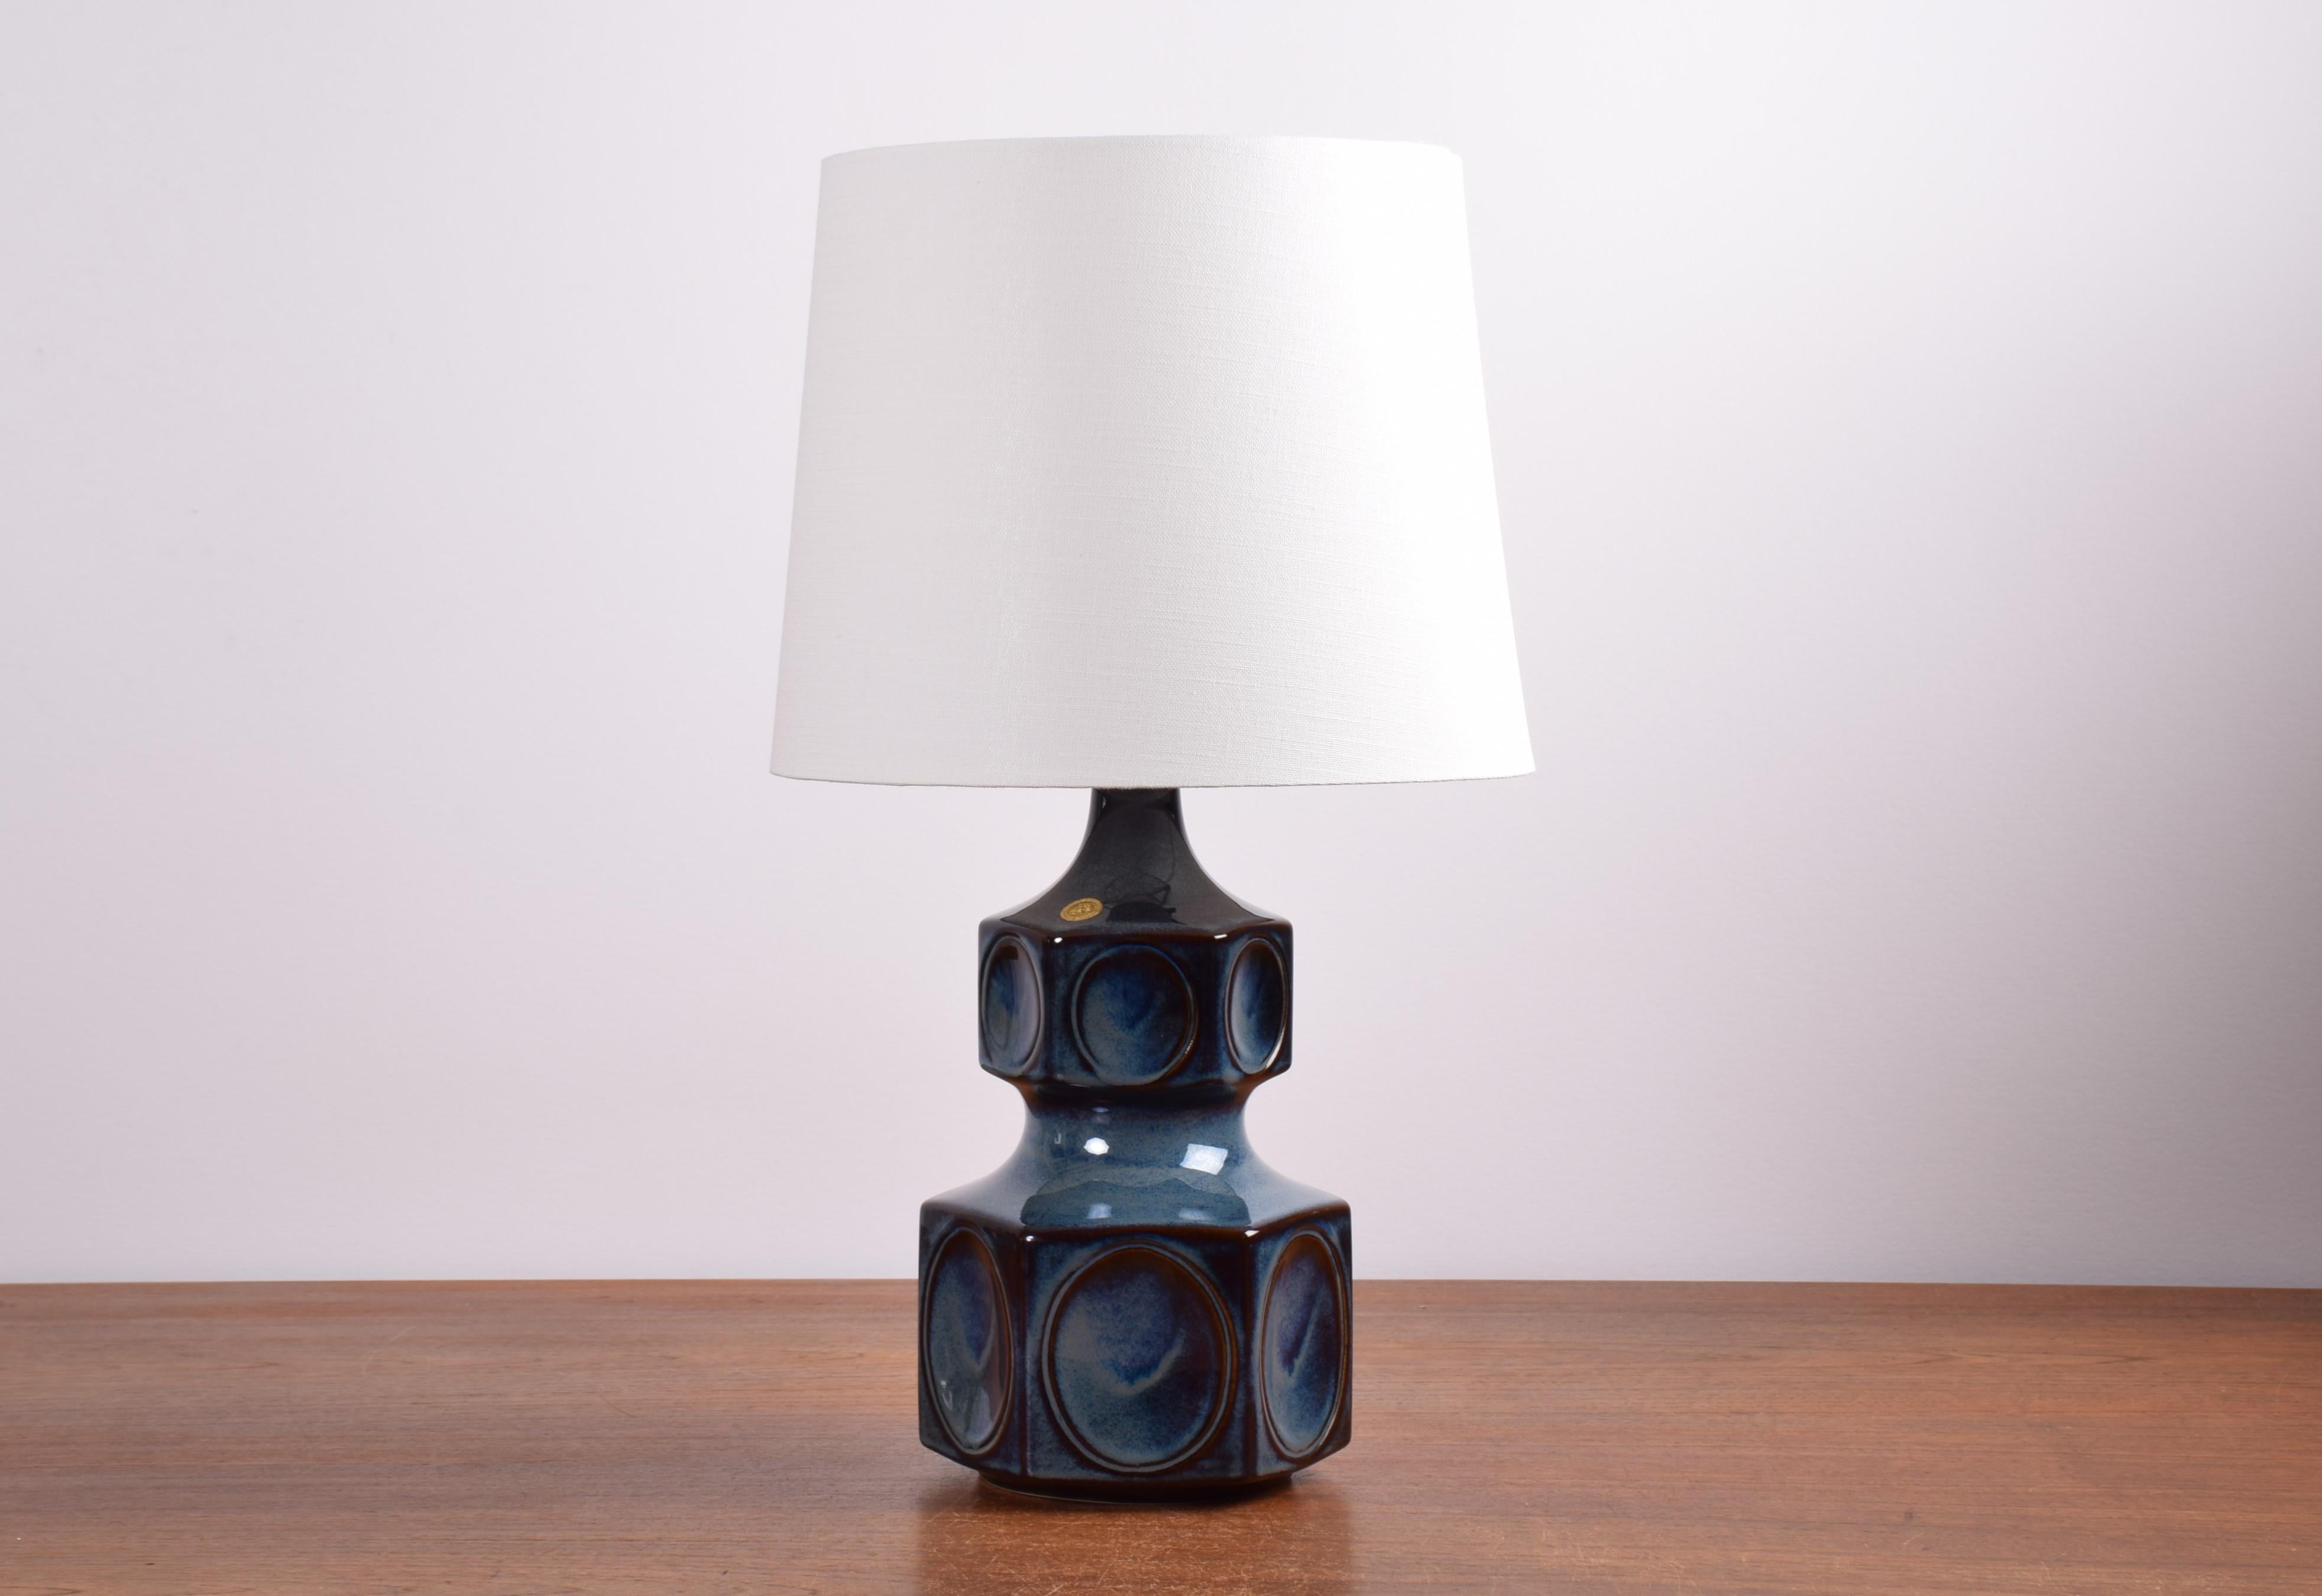 Sculptural table lamp by Einar Johansen for Søholm Stentøj, Denmark, circa 1960s.
The sculptural shape and the shiny blue glaze with brown elements gives the lamp a very vivid expression.

Included is a new lamp shade designed and made in